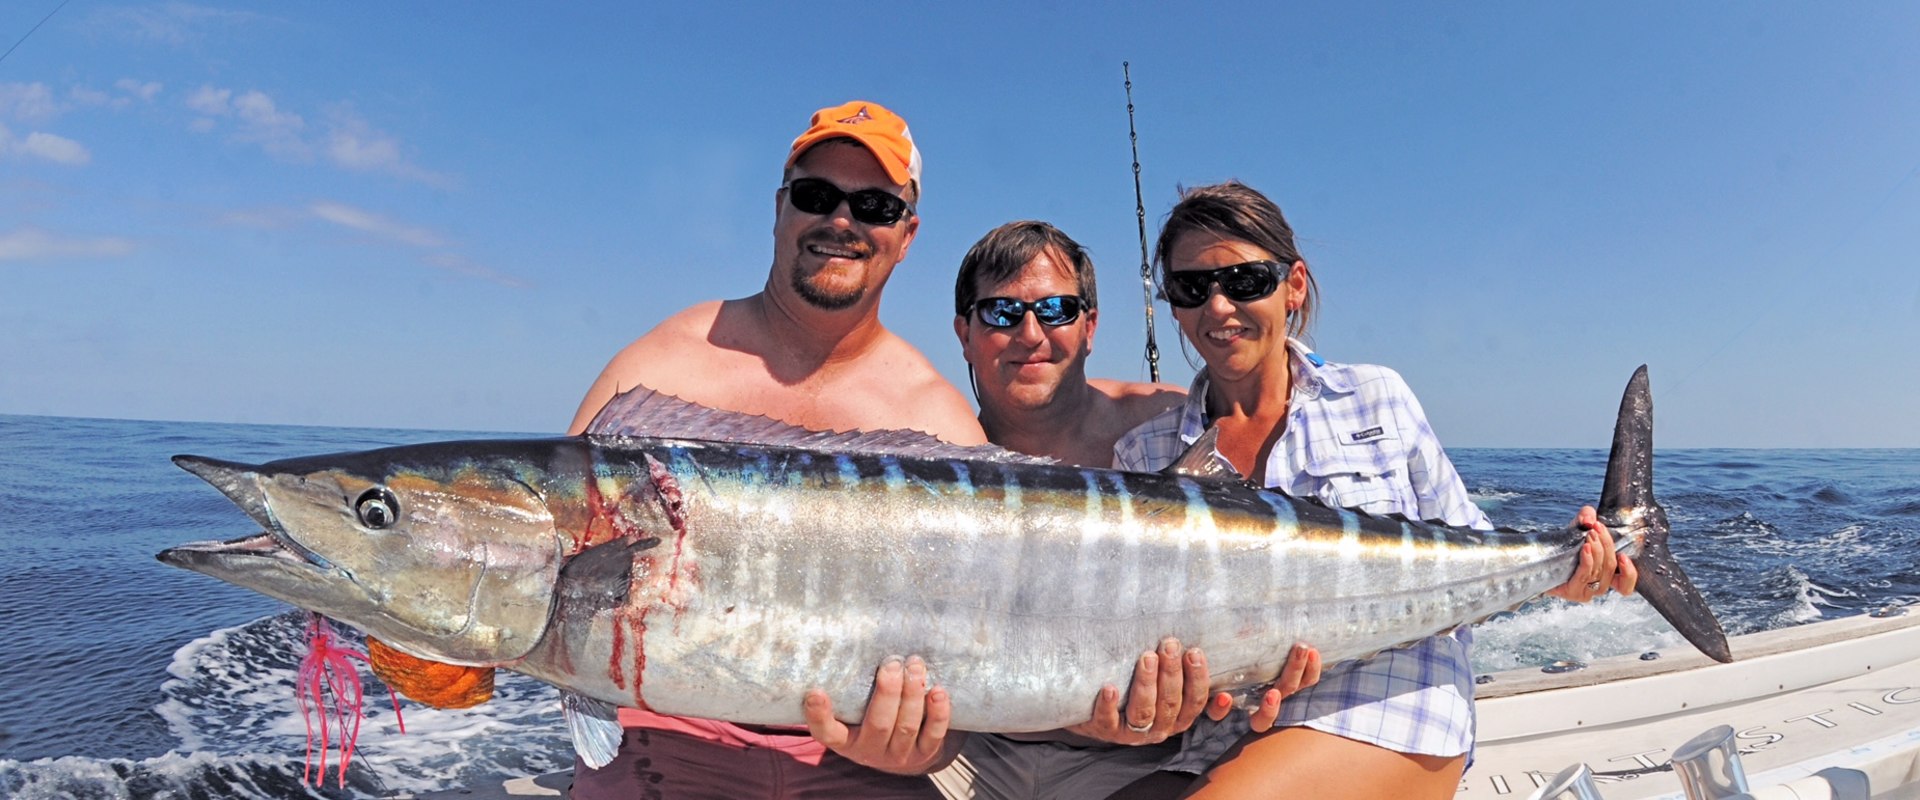 Can Fishing Charters Take You on an Unforgettable Adventure?